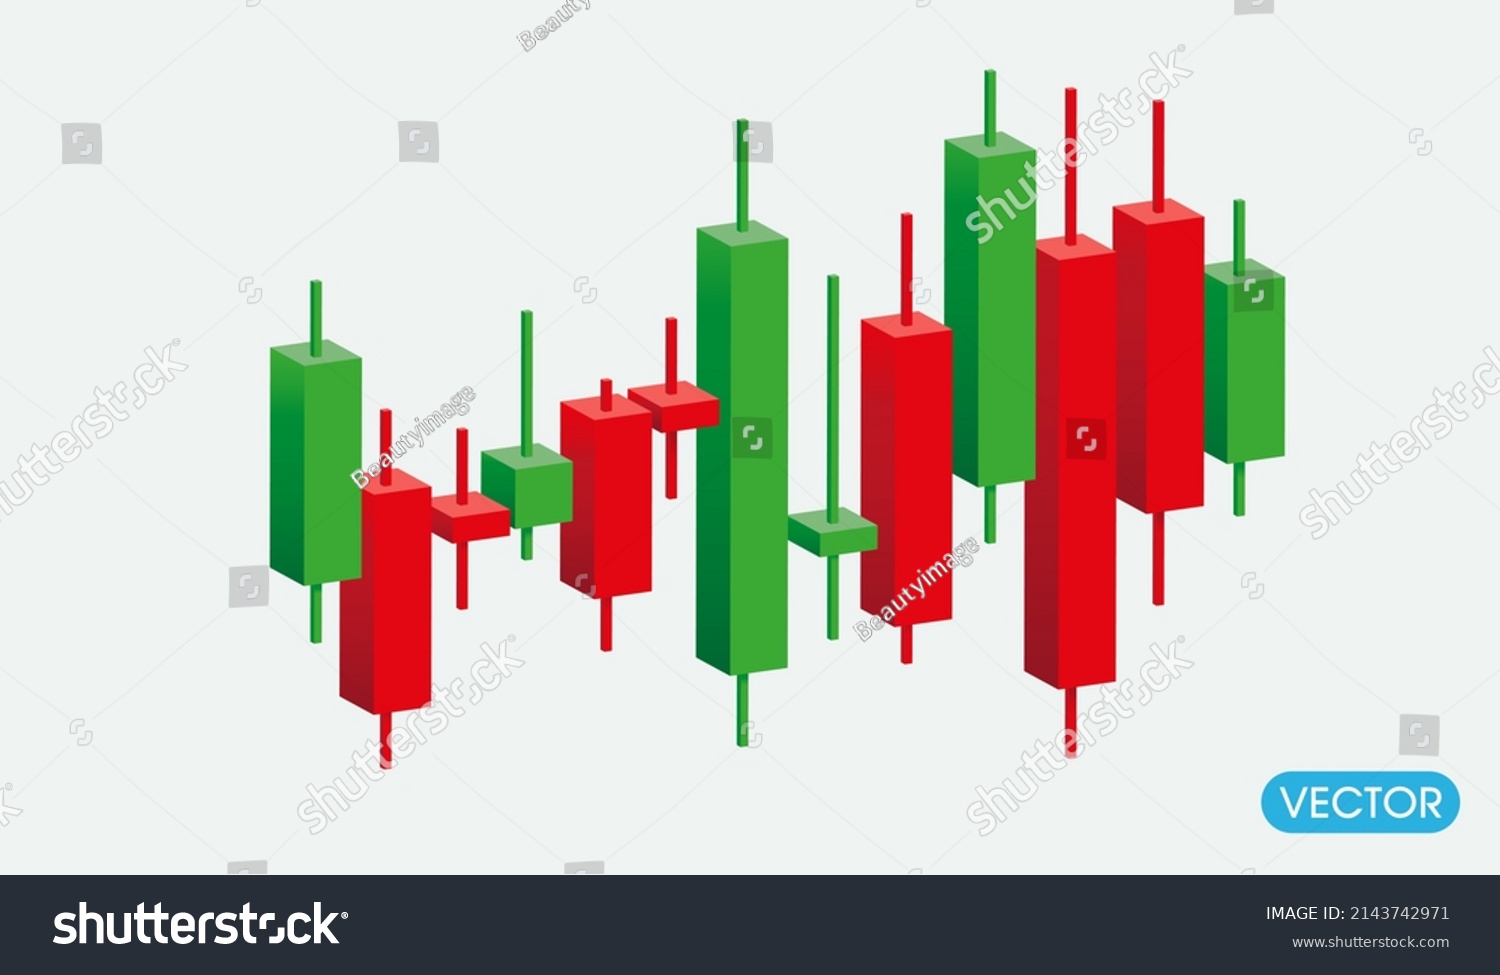 SVG of Growth stock diagram financial graph. candlestick icon trading stock or forex 3d icon vector illustration style svg